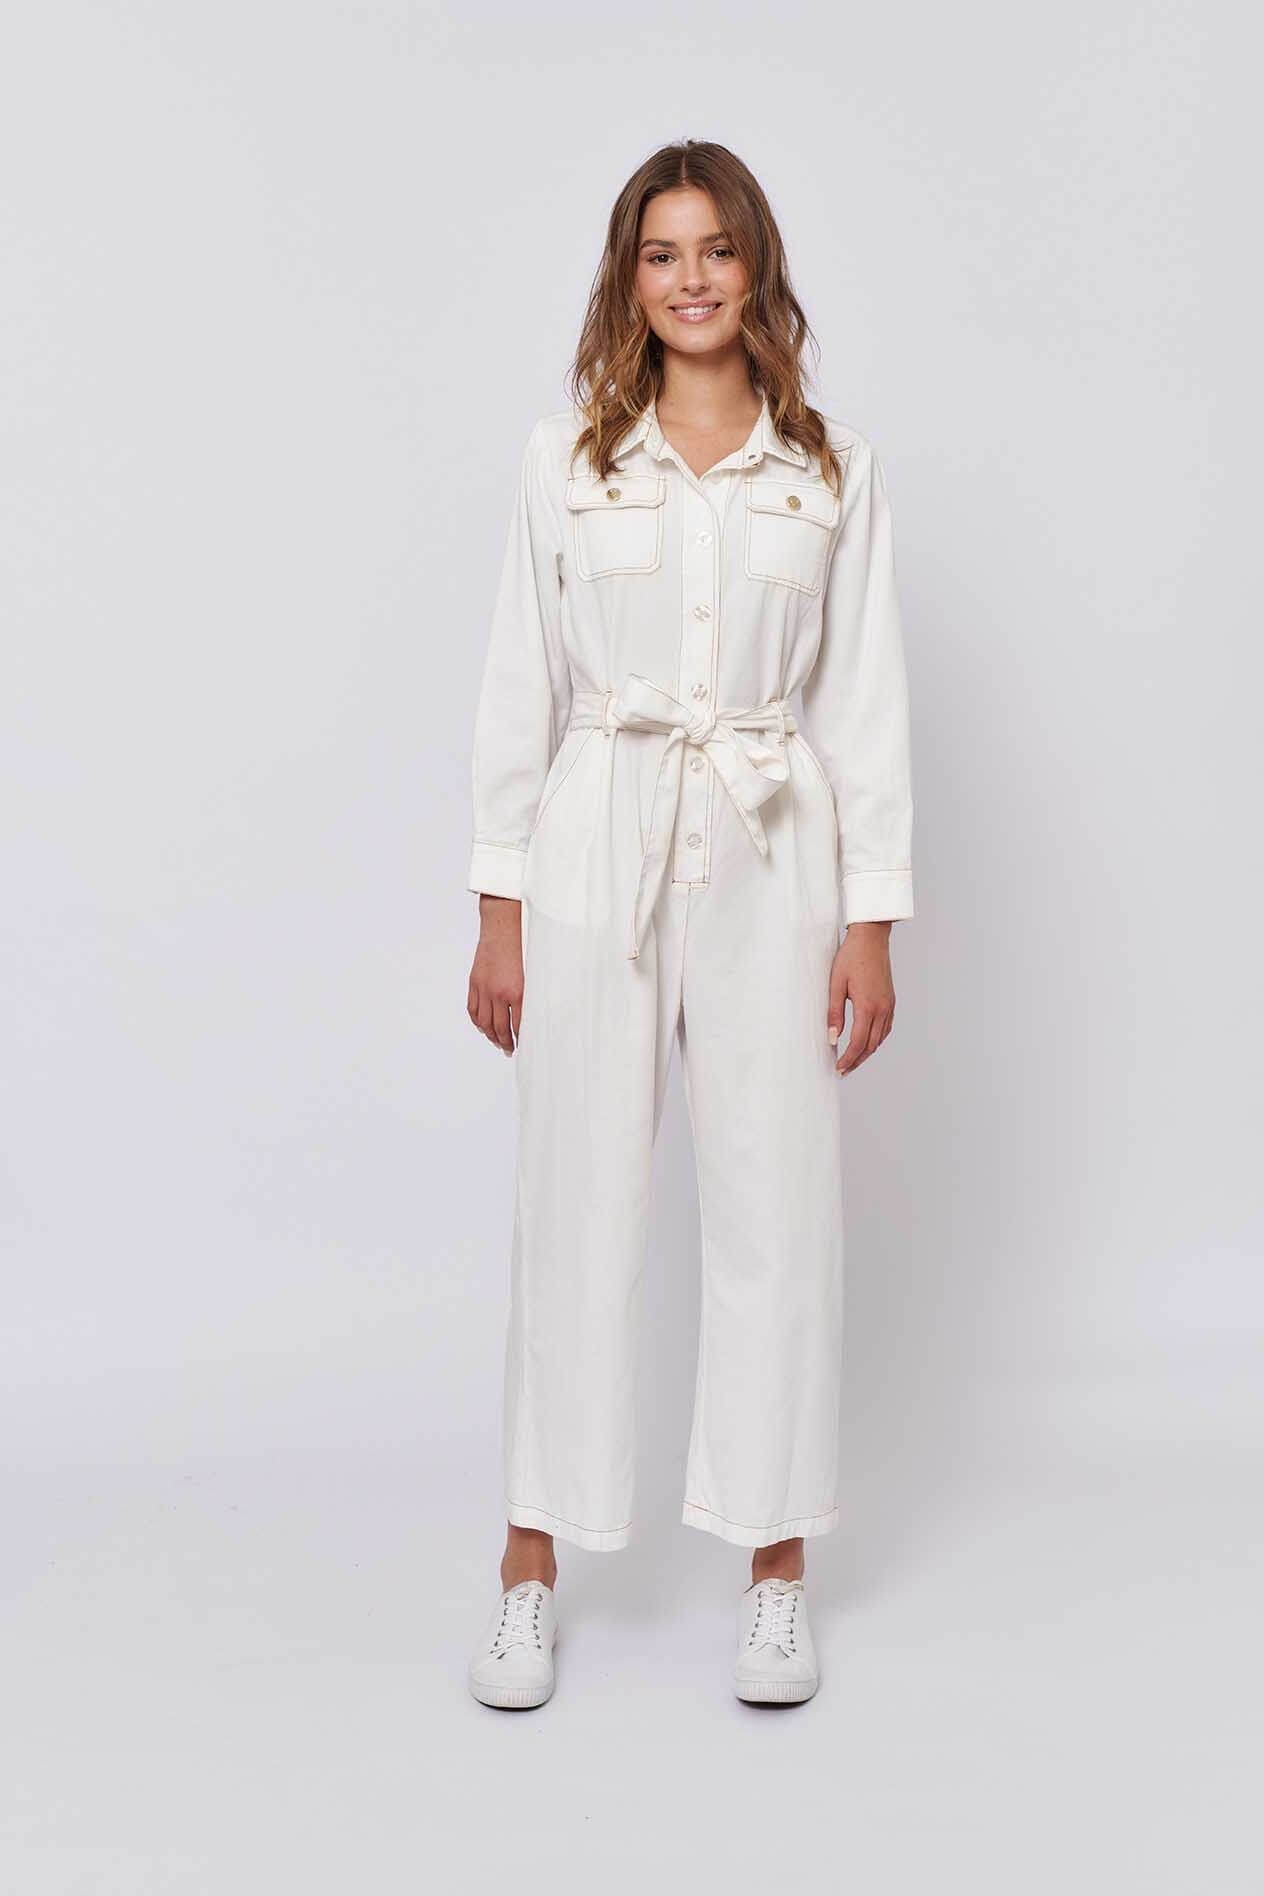 Premium AI Image | Design of Denim Jumpsuit Cotton Unisex Relaxed Fit This  Unisex Jumpsui Isolated on White BG Blank